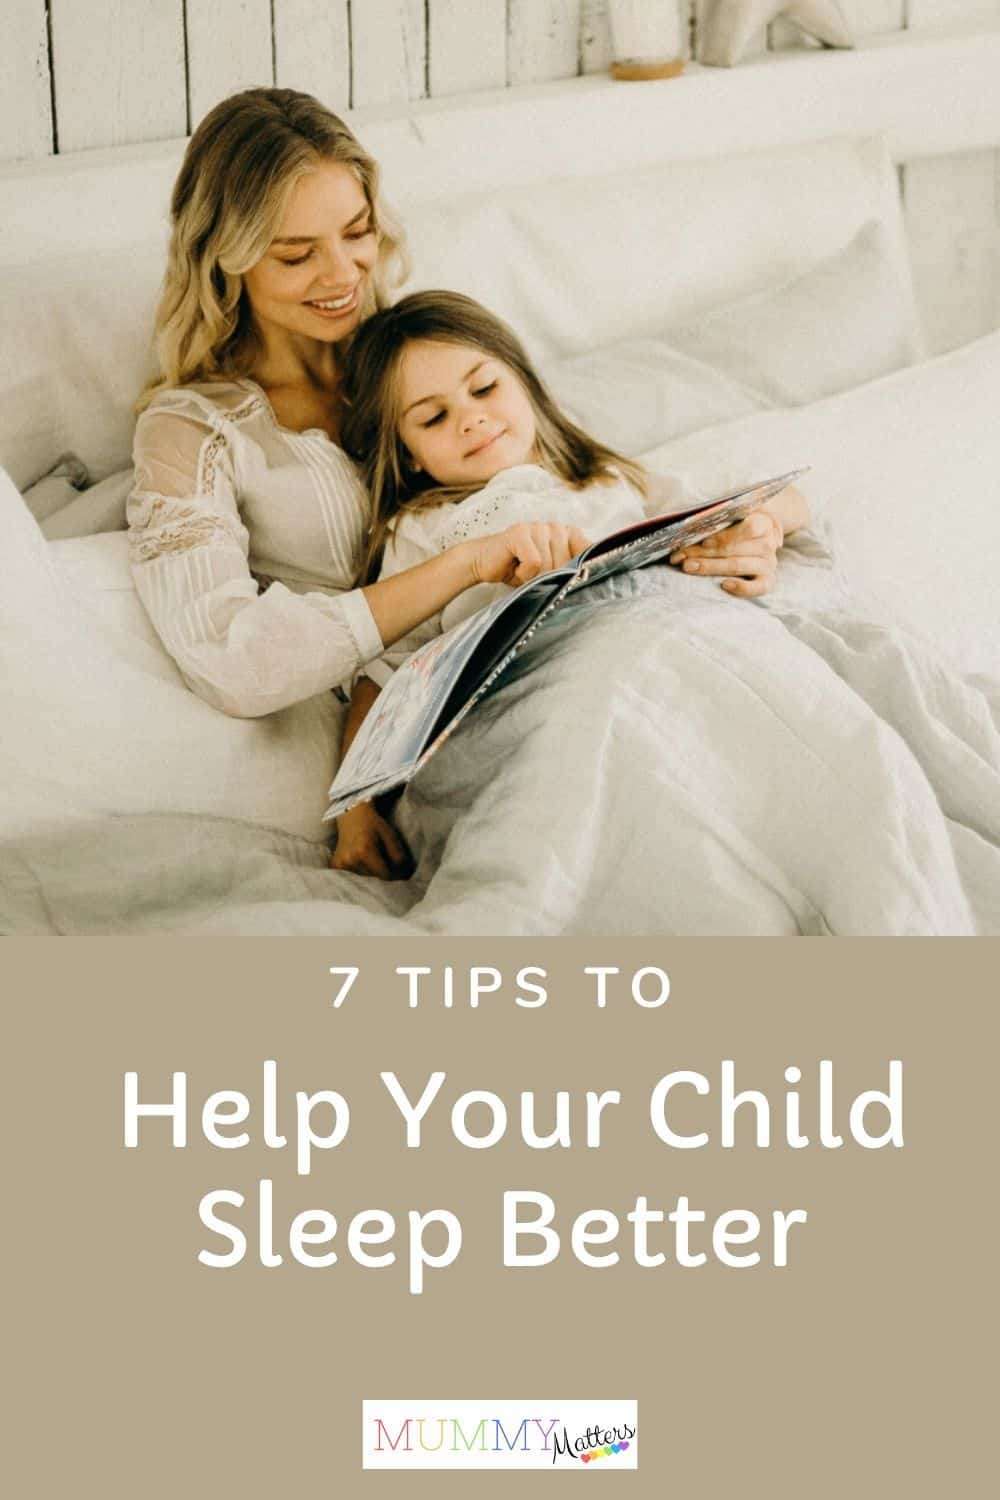 7 Tips To Help Your Child Sleep Better Mummy Matters Parenting And